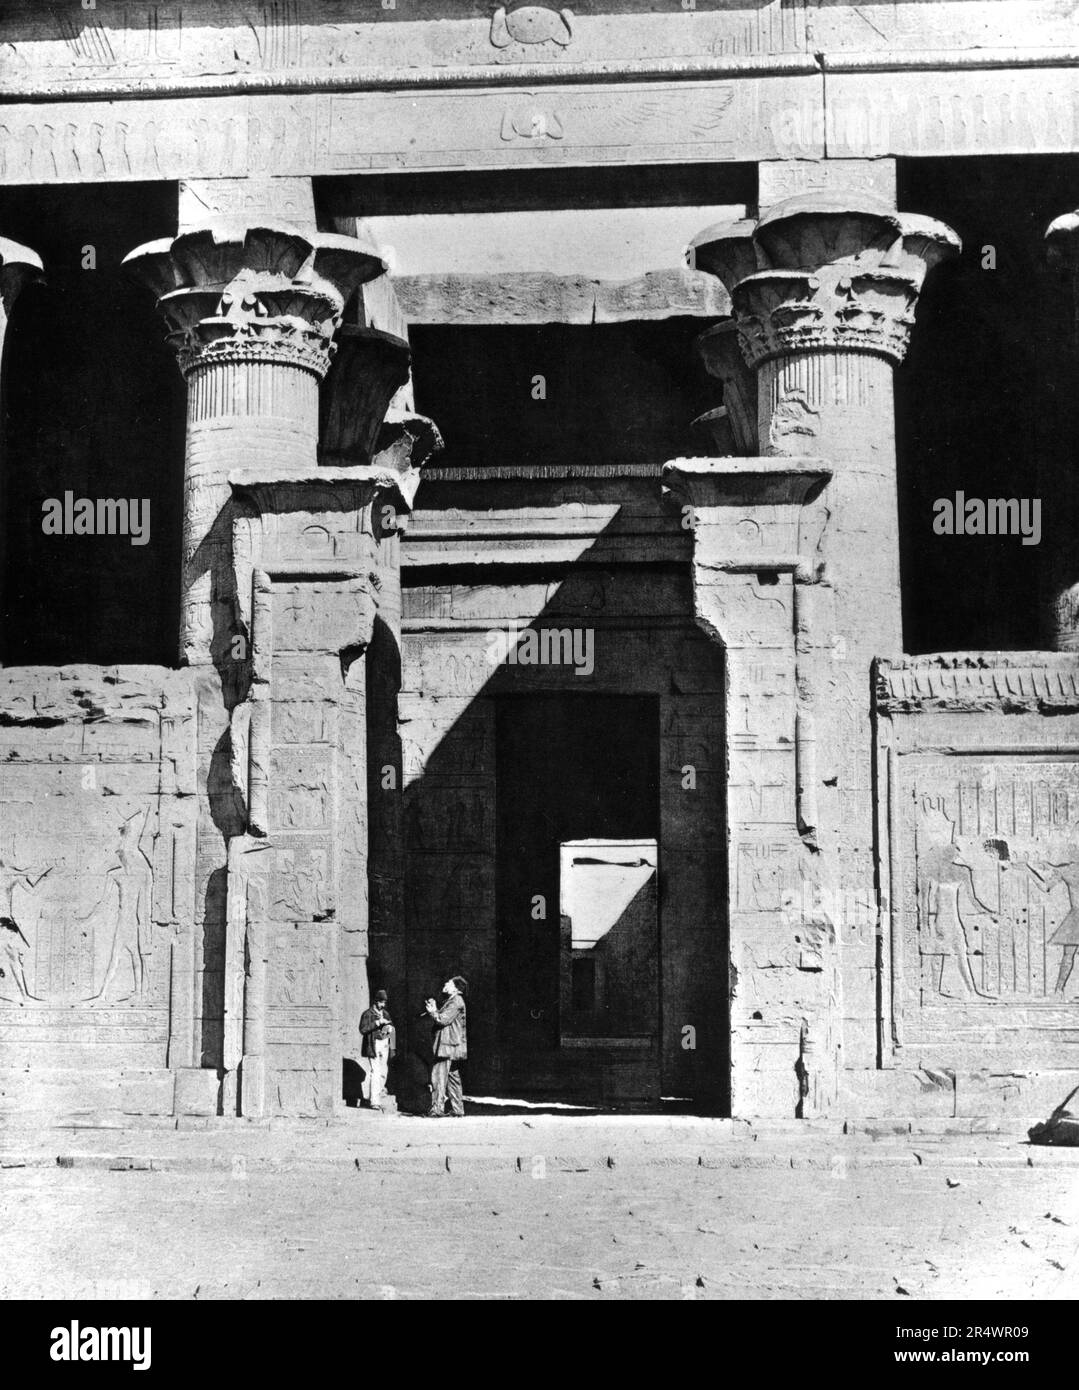 Temple of Edfu, dedicated to the  Ancient Egyptian falcon-headed god Horus. Photographed in 1860s during work of Auguste Mariette-Bey (1821-1881) French archaeologist and founder of the Egyptian Museum, Cairo in 1863. Stock Photo